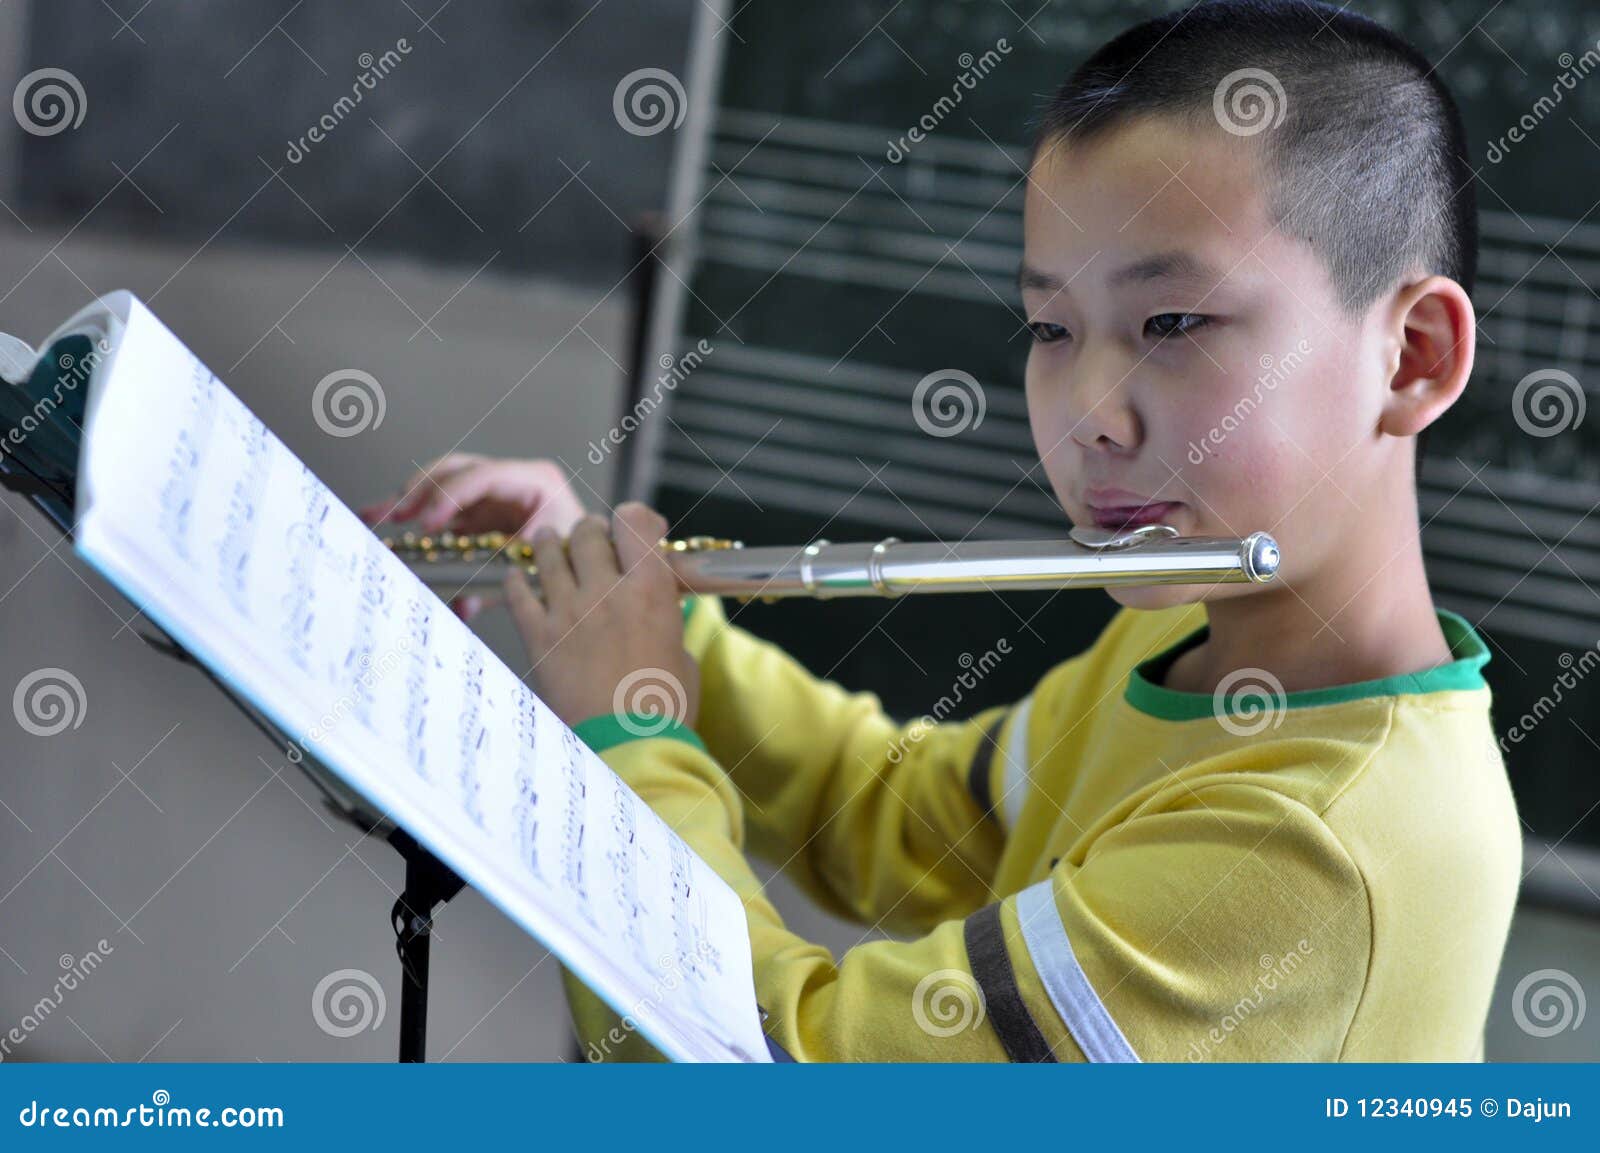 Learn the flute stock image. Image of beauty, music, child - 12340945